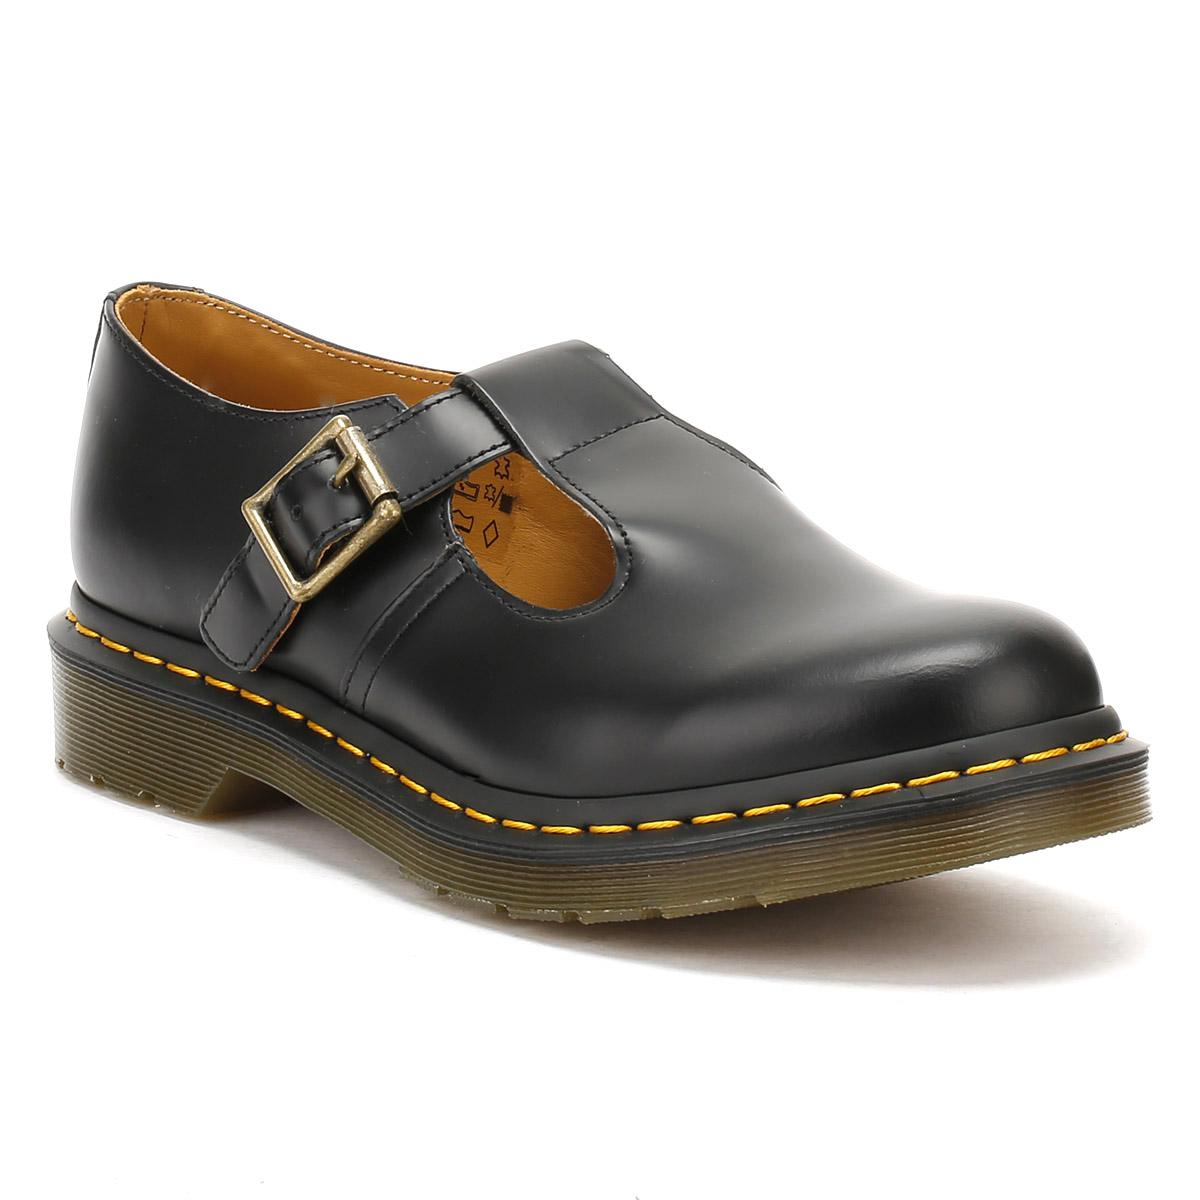 Lyst - Dr. Martens Dr. Martens Womens Black Smooth Polley Shoes in Black